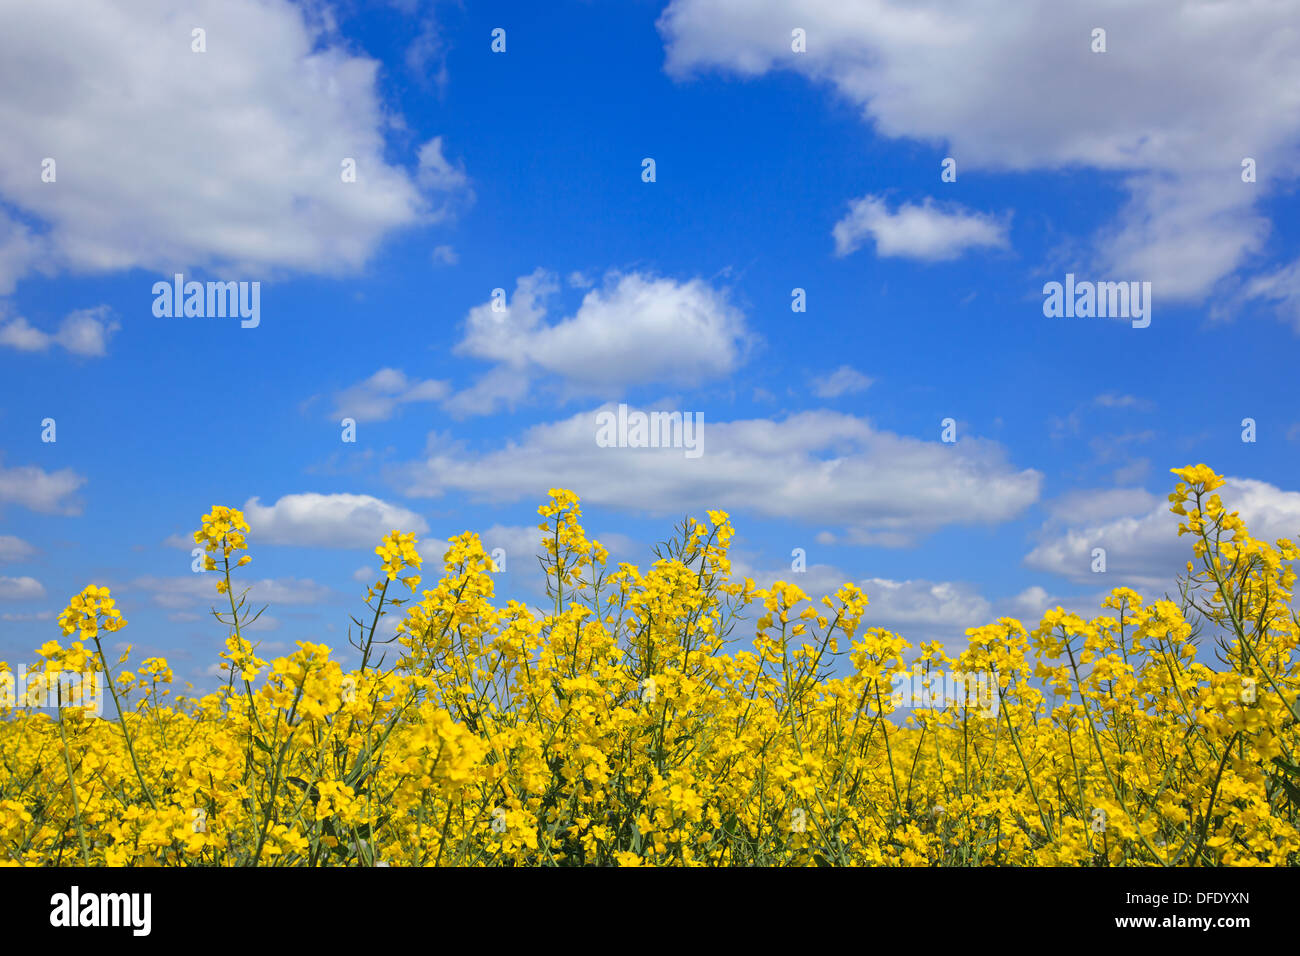 Yellow rapeseed flowers against a bright blue sky with white clouds on a sunny day as spring turns into summer. Stock Photo